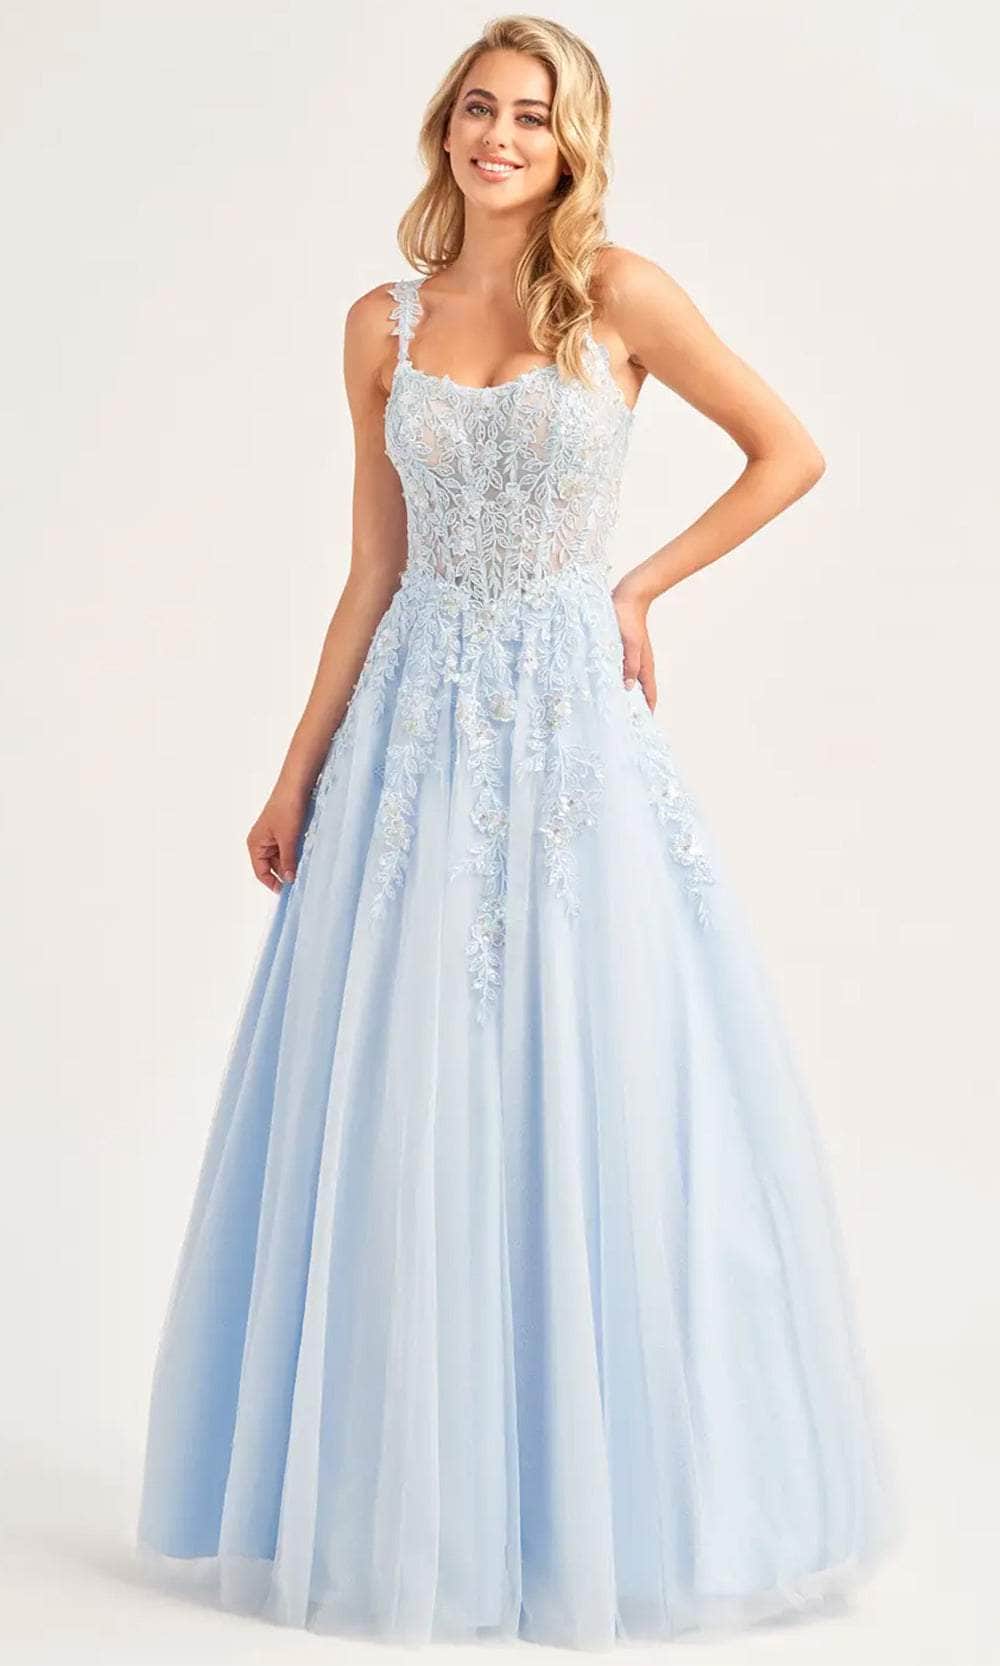 Ellie Wilde EW35123 - Embroidered Scoop Neck Prom Gown Prom Dresses 00 / Light Blue